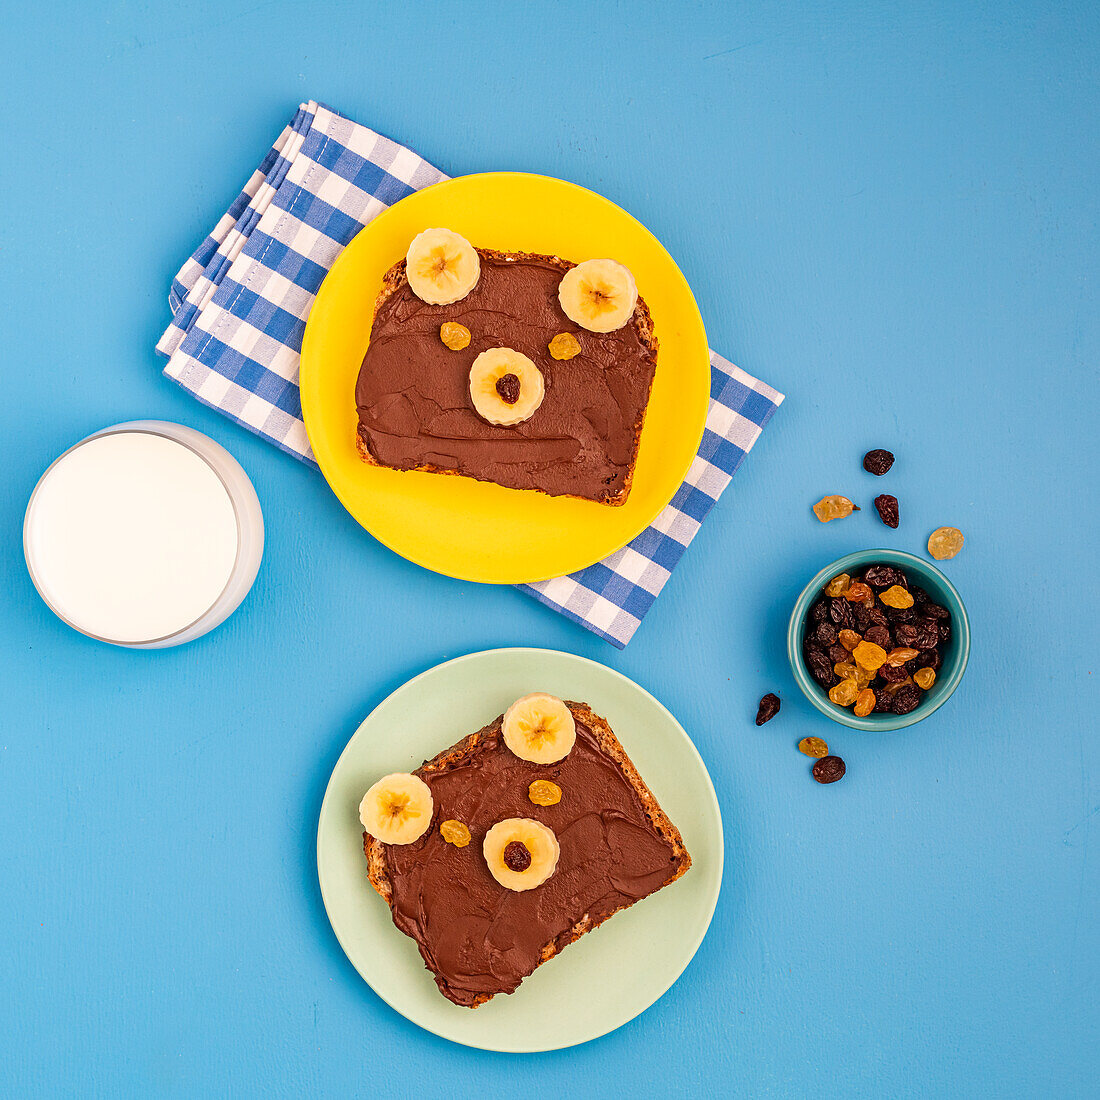 Sandwiches with Nutella, decorated with banana, sultanas and sultanas